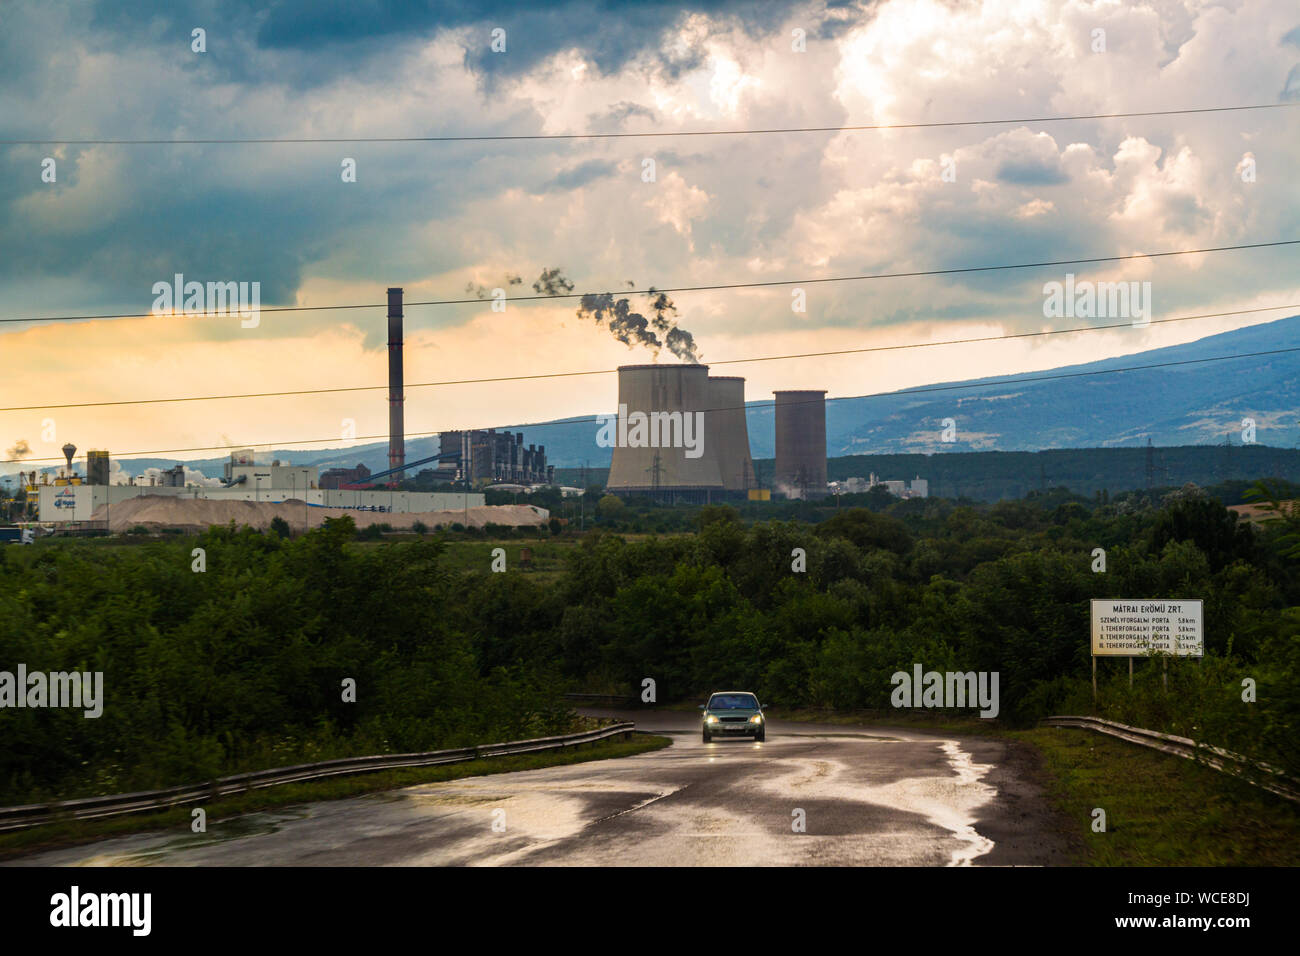 View of the Matrai Eromu (lignite fired power plant) at the foot of the Matra Mountains, Visonta, Hungary Stock Photo